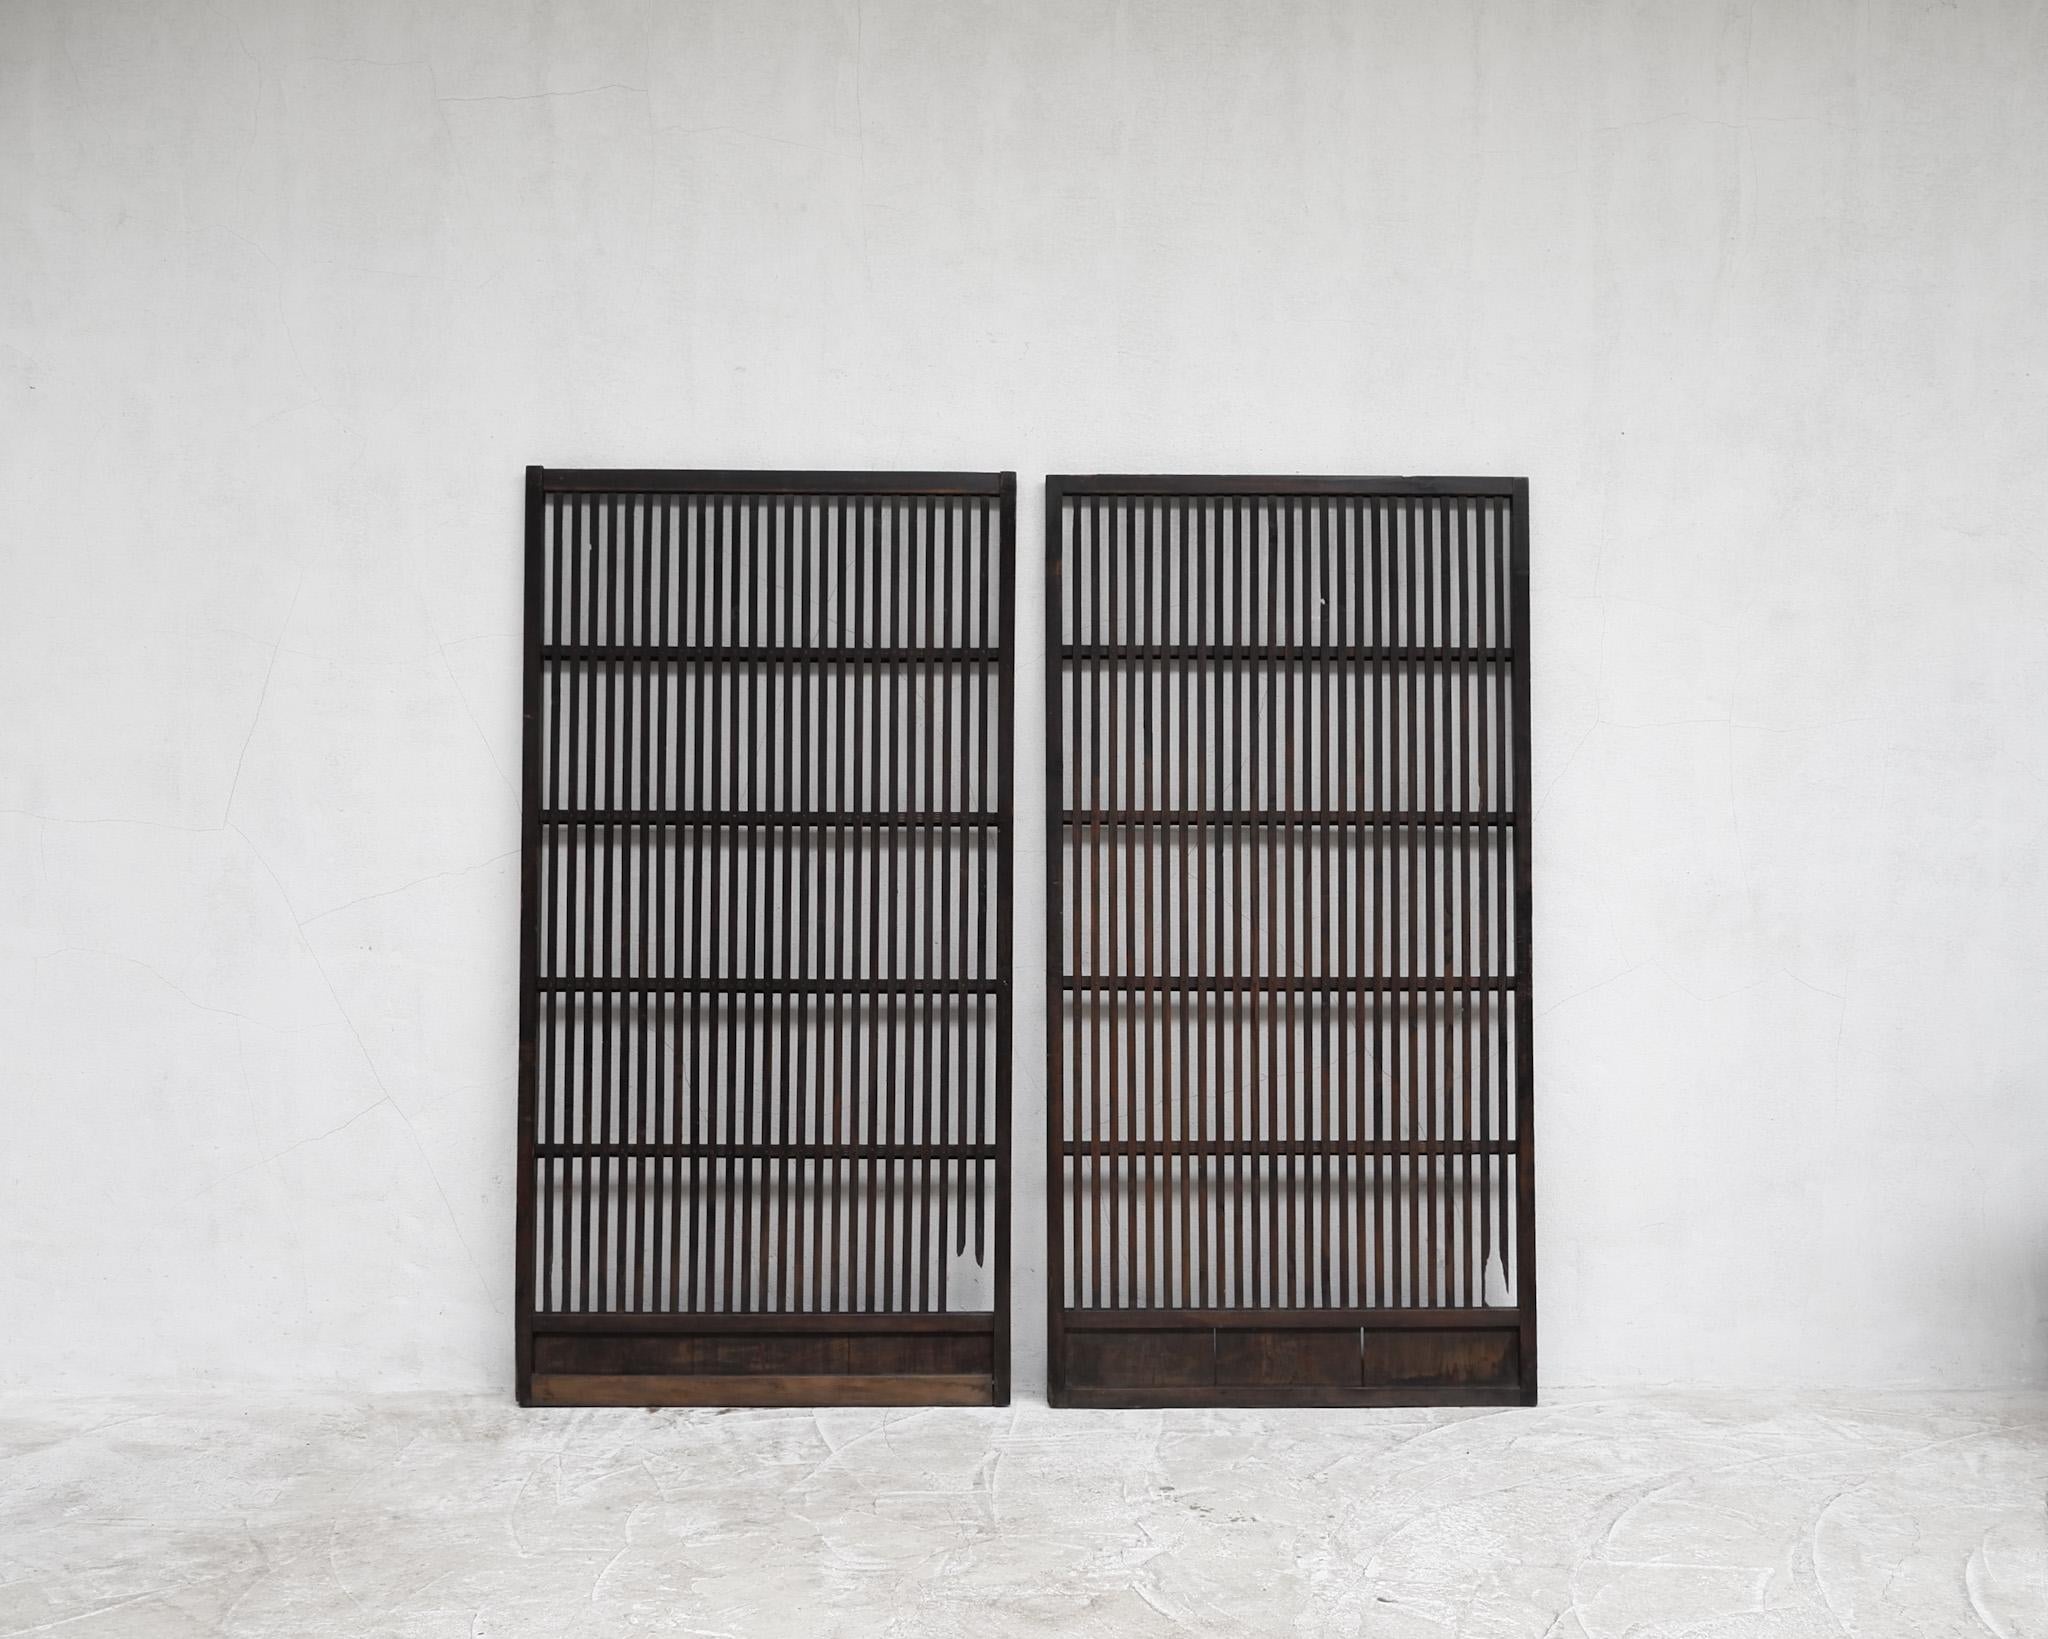 A large early Meiji period wooden slatted screen.

Made from Japanese cedar & originally used as room partitions these heavily patinated examples could be used again as screens or as pieces of art in their own right.

Price is for the last remaining